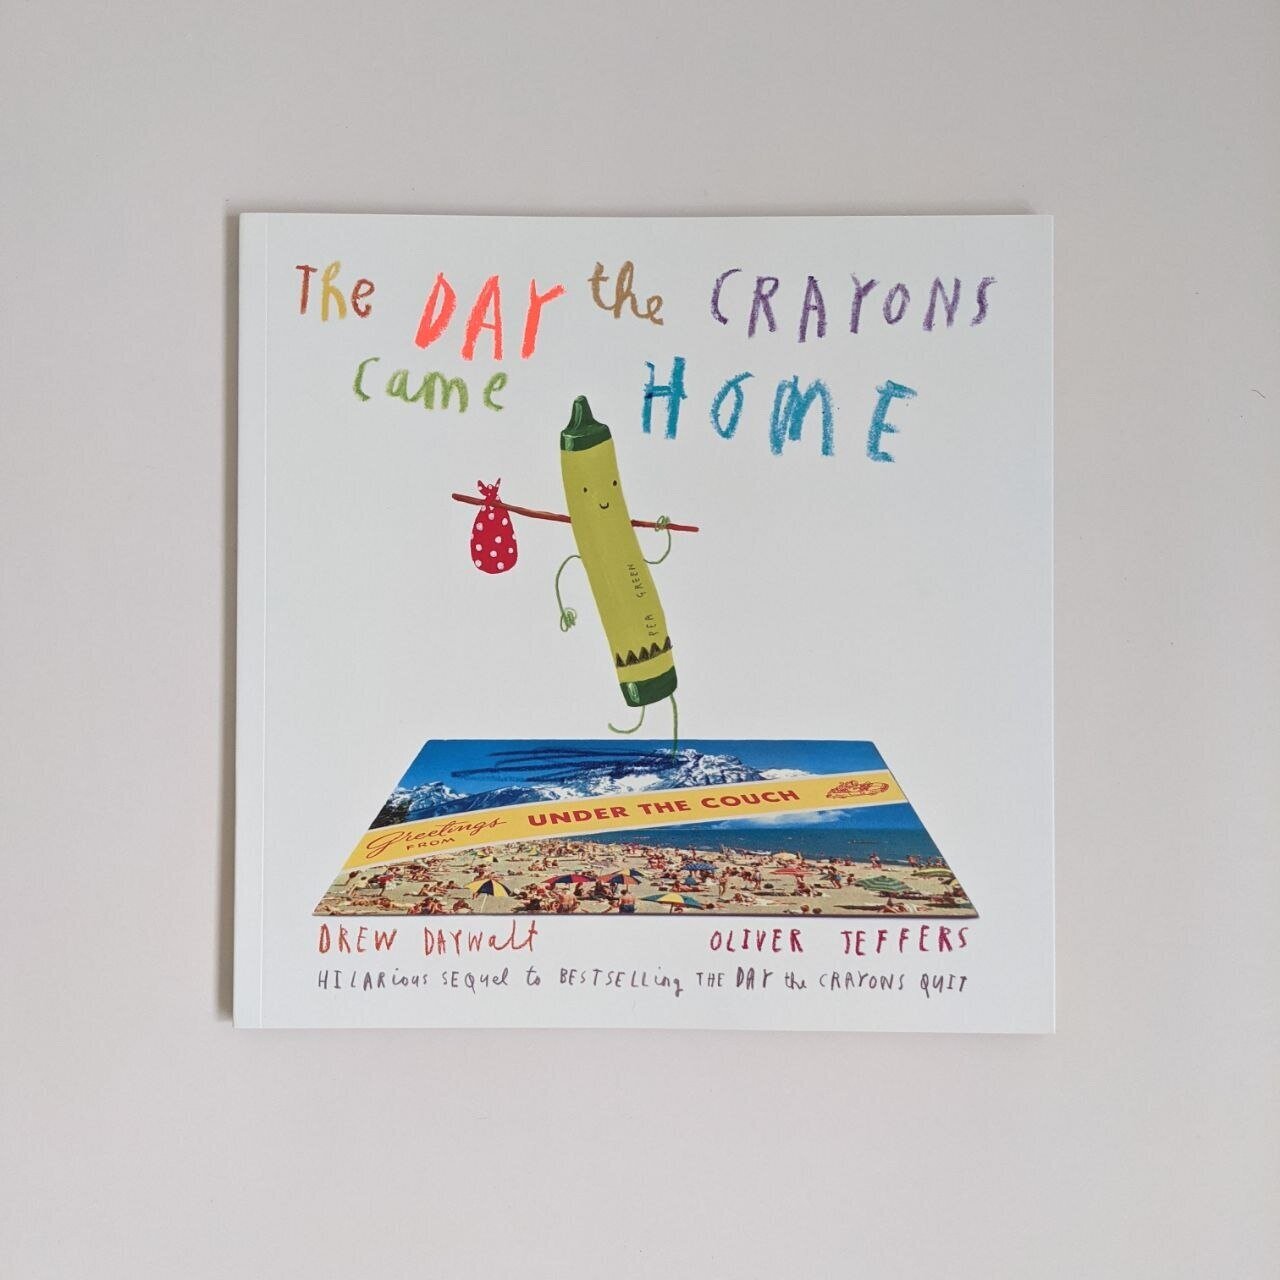 The Day The Crayons Came Home by Drew Daywalt